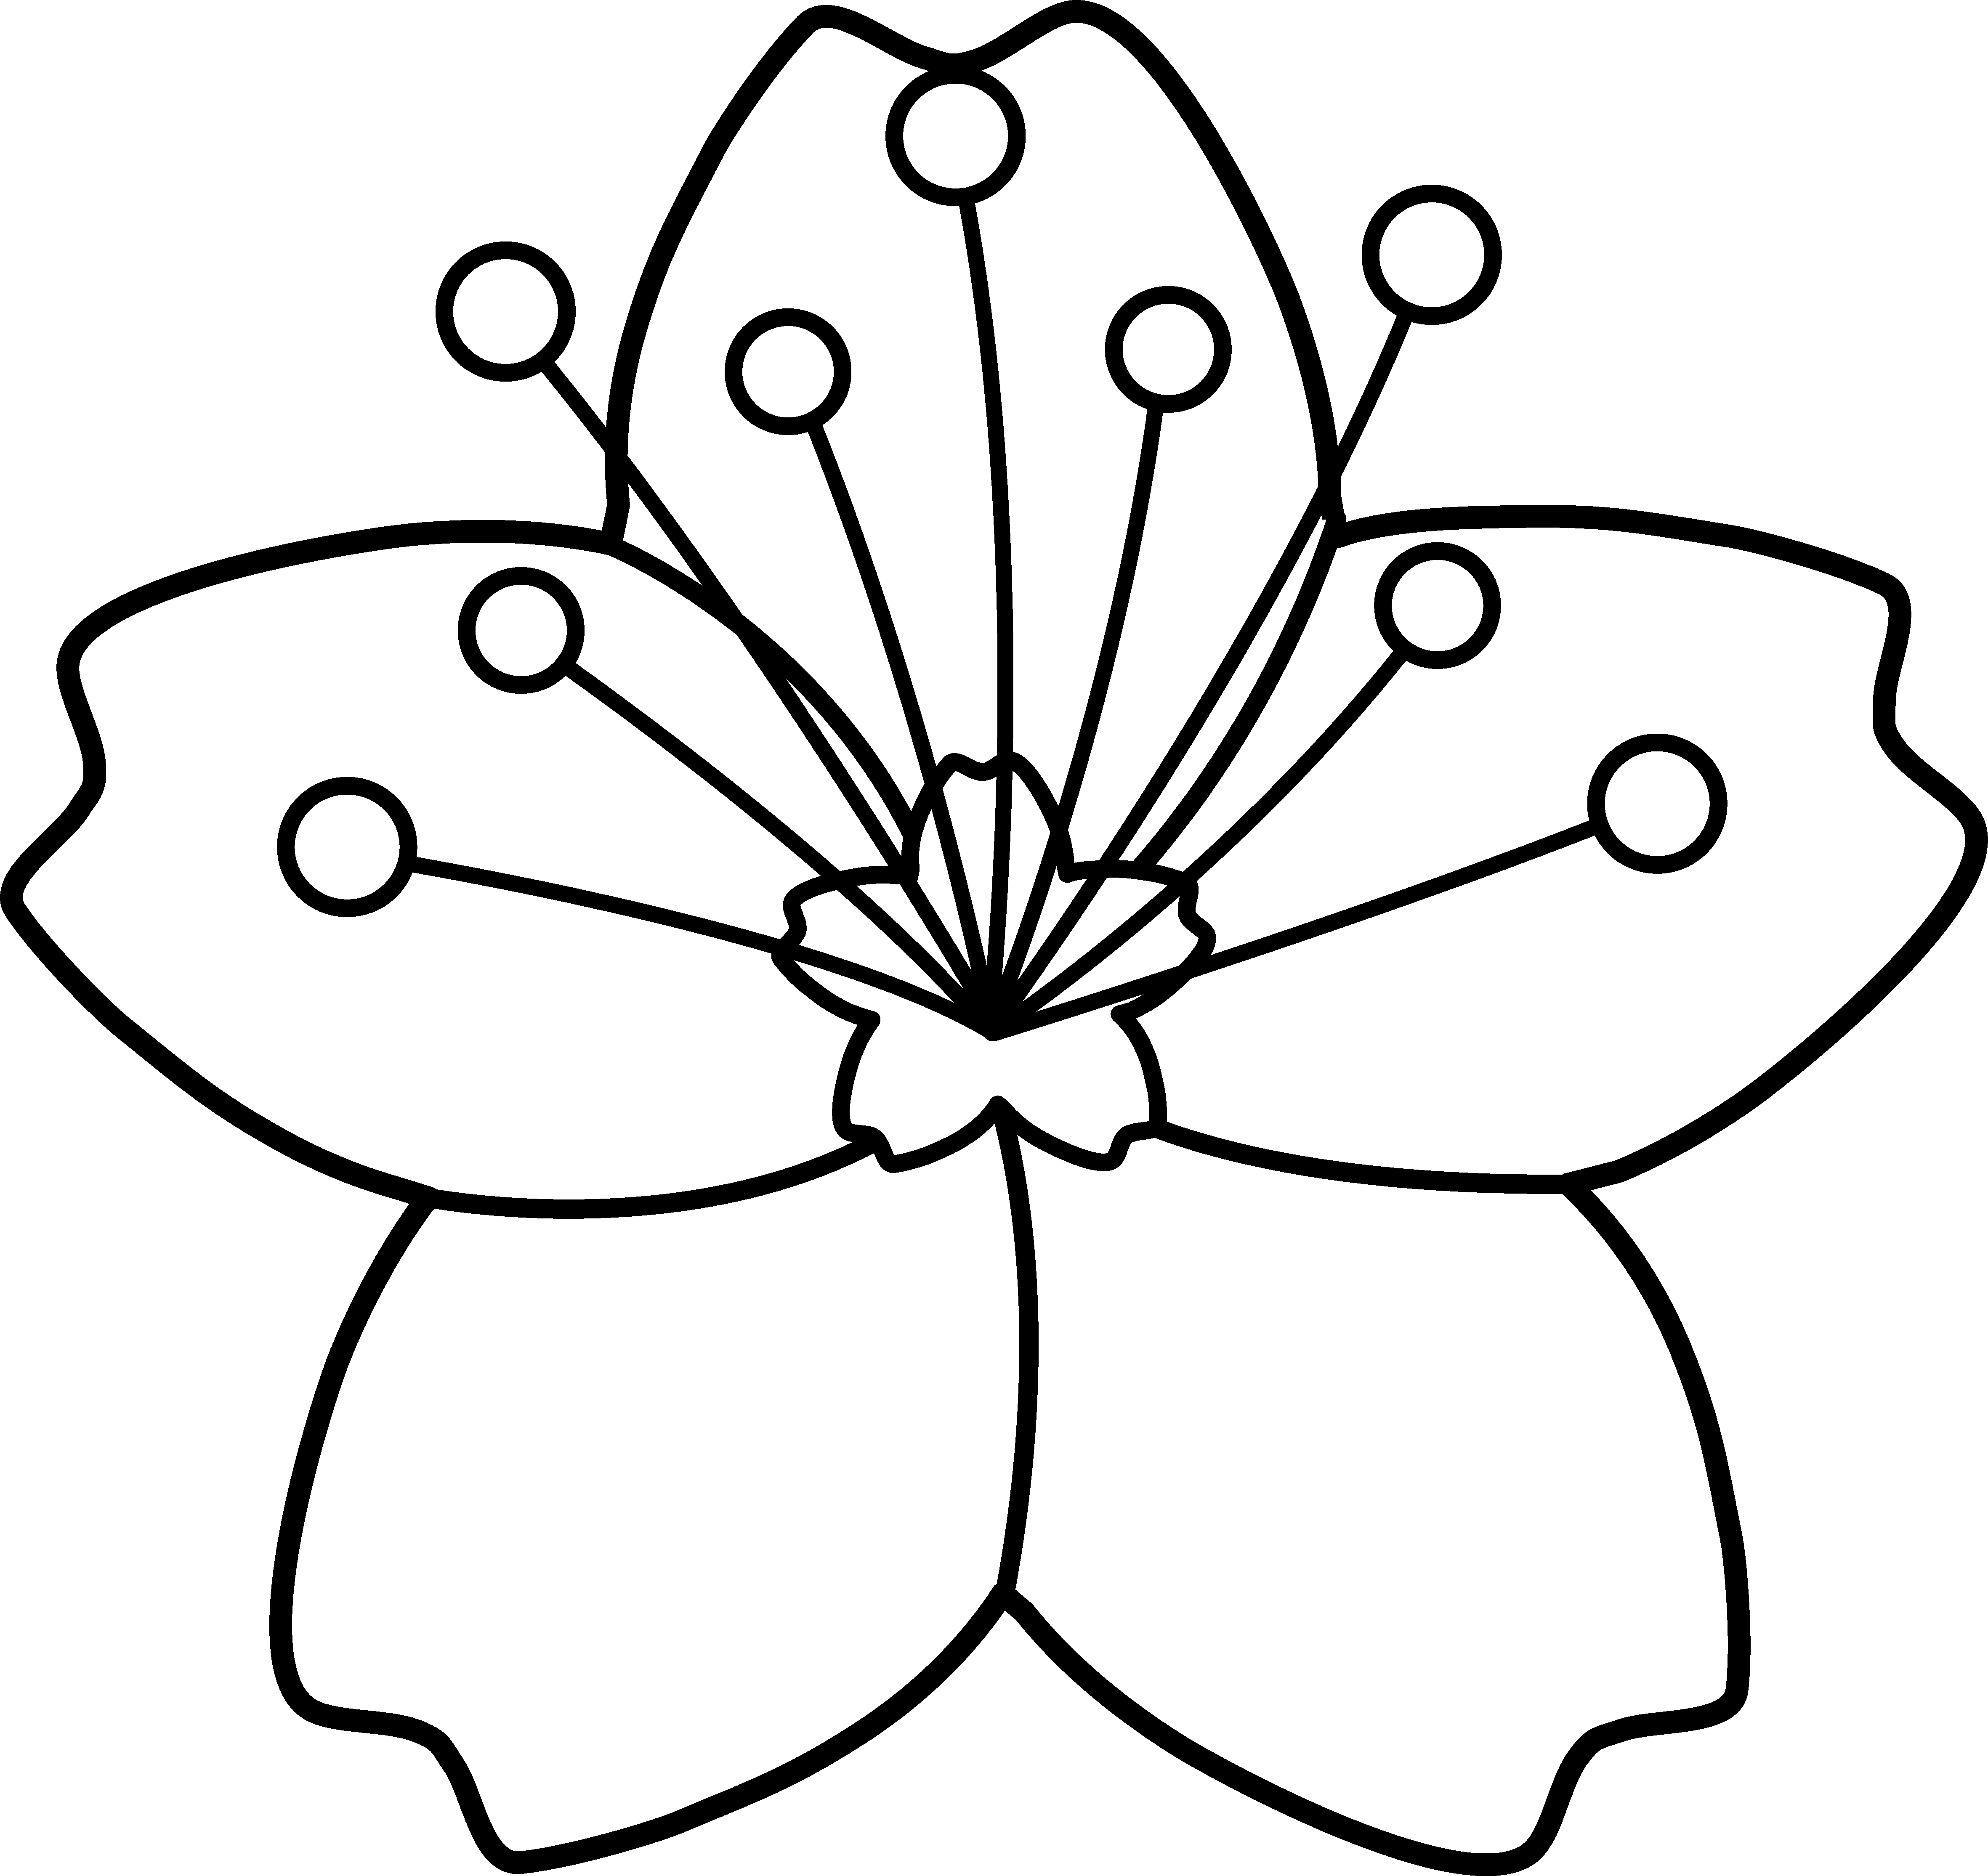 Simple Flower Outline - Cliparts.co